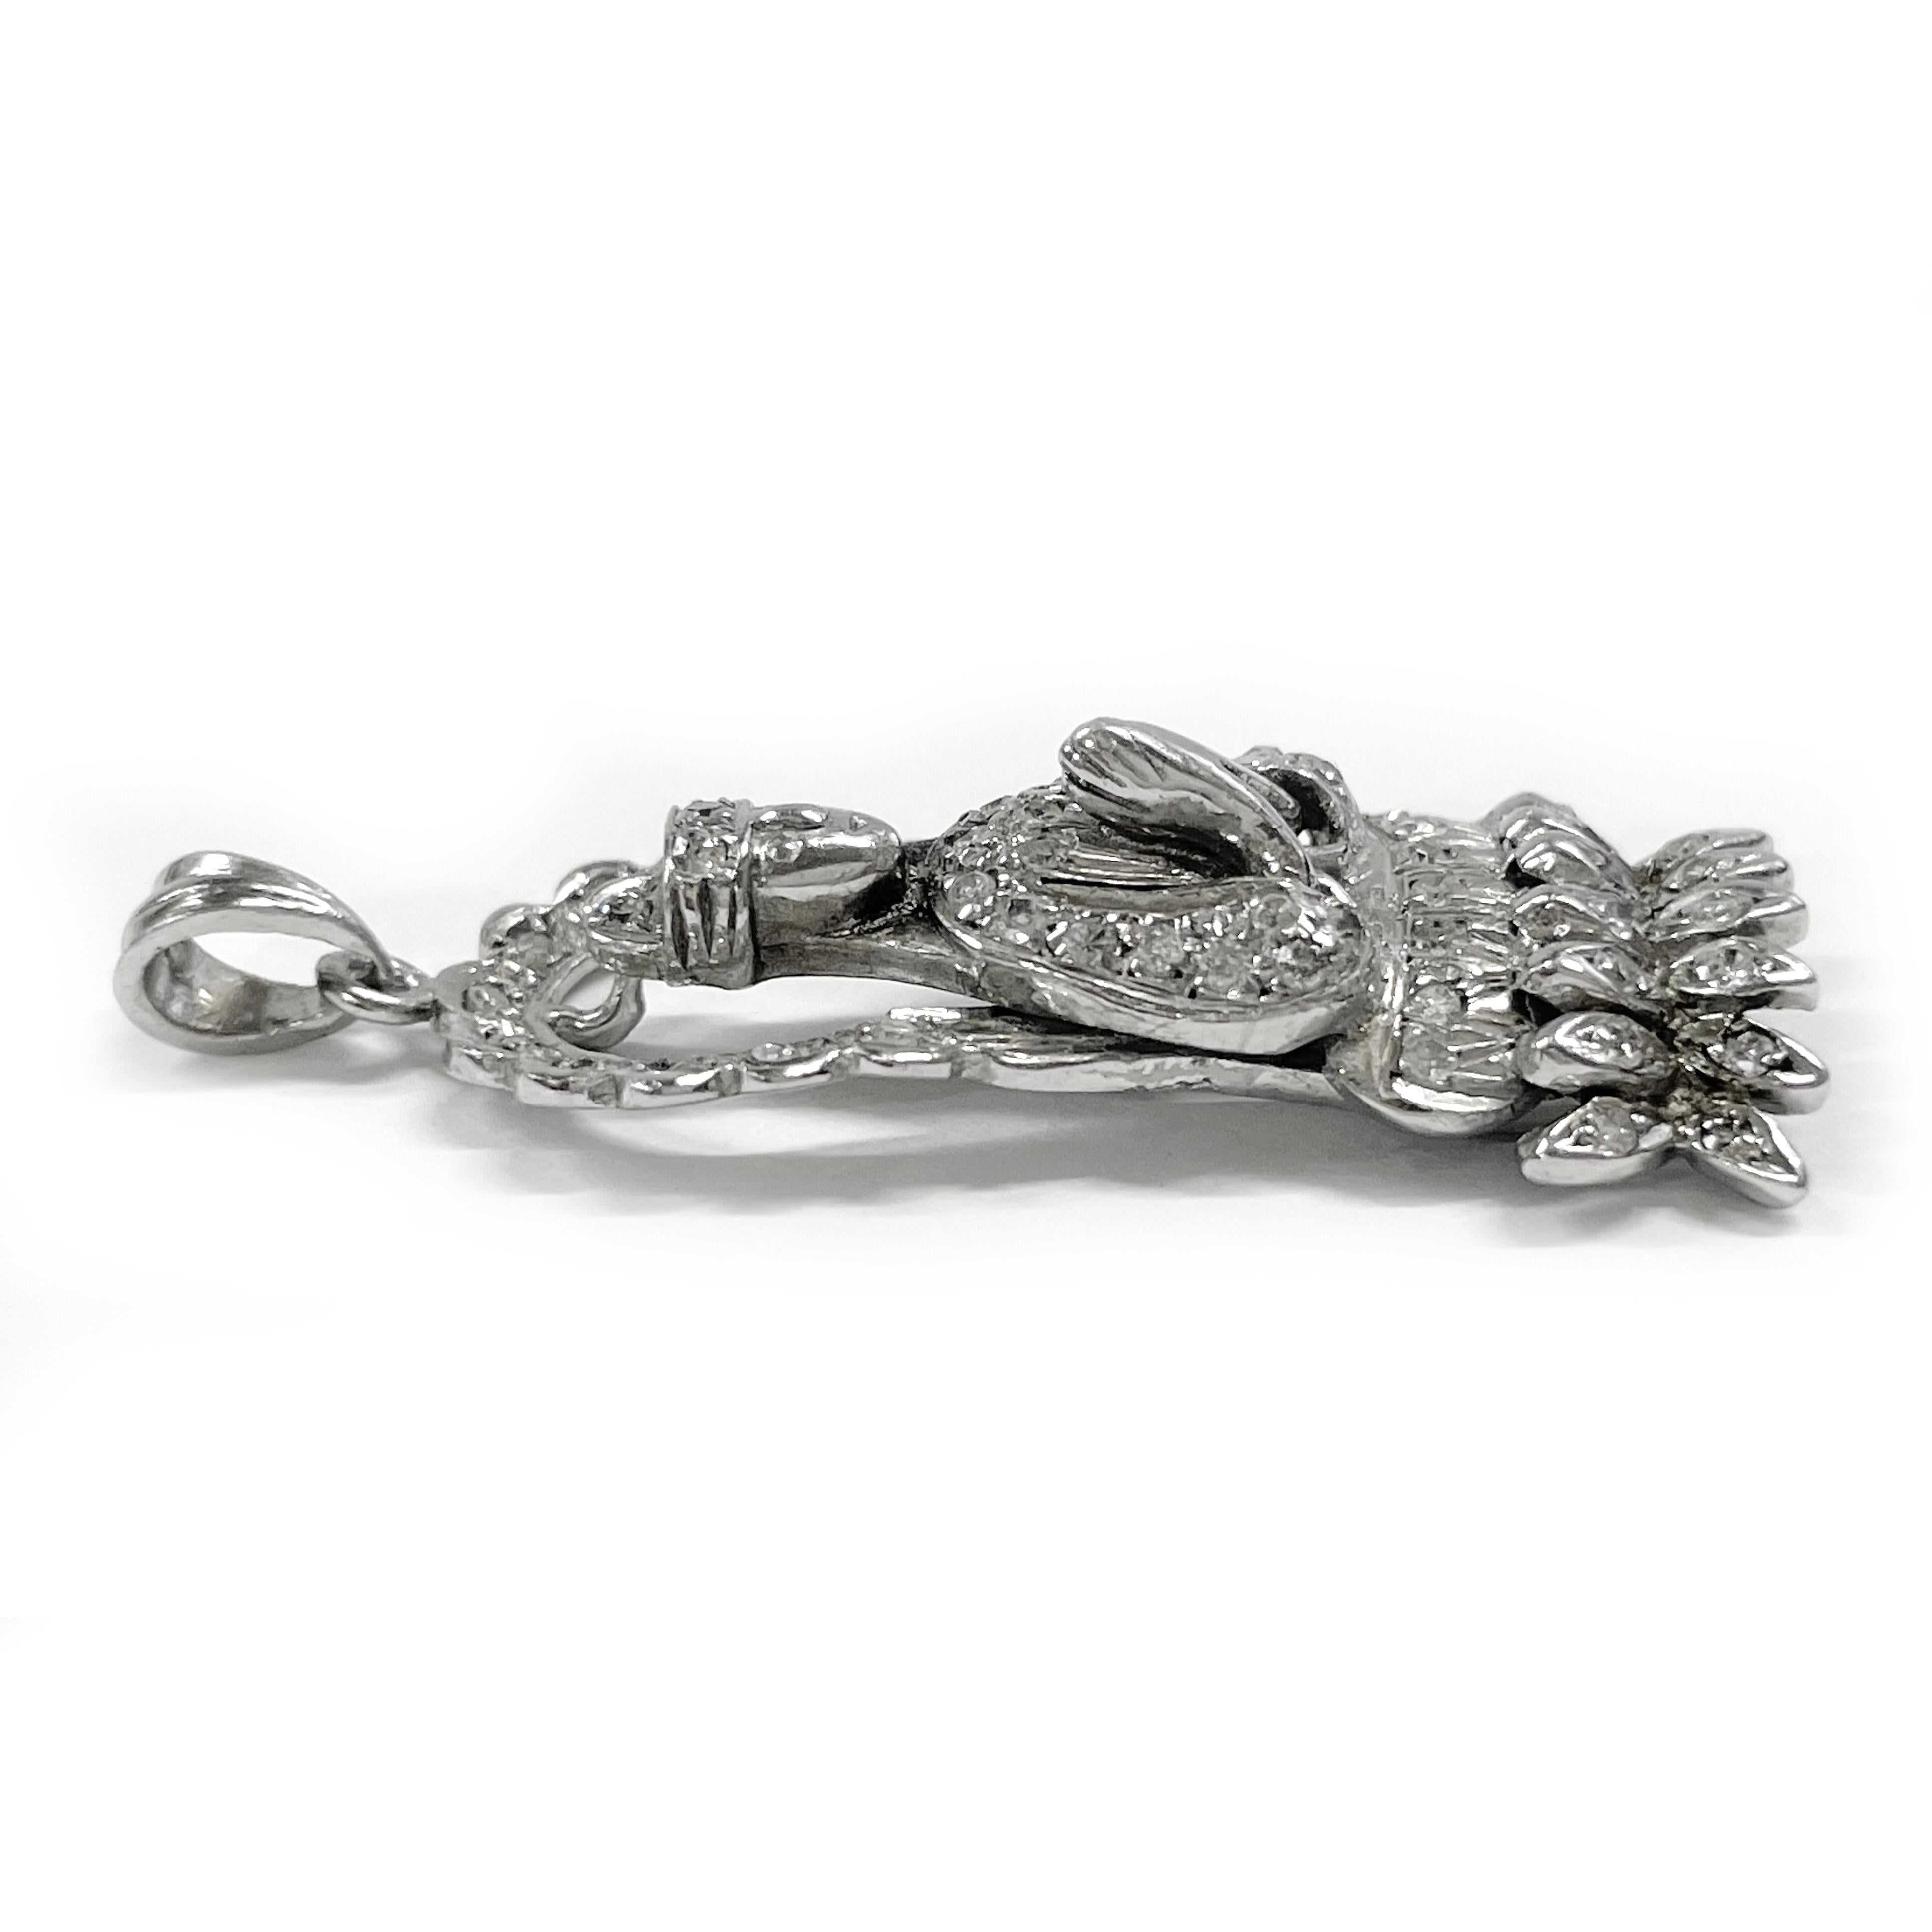 18 Karat White Gold Diamond Buddha Pendant. The pendant features a praying Buddha with round 1.5mm diamonds adorning the majority of the pendant. There is a total of fifty-one single cut diamonds bead-set on white gold. The diamonds have a total